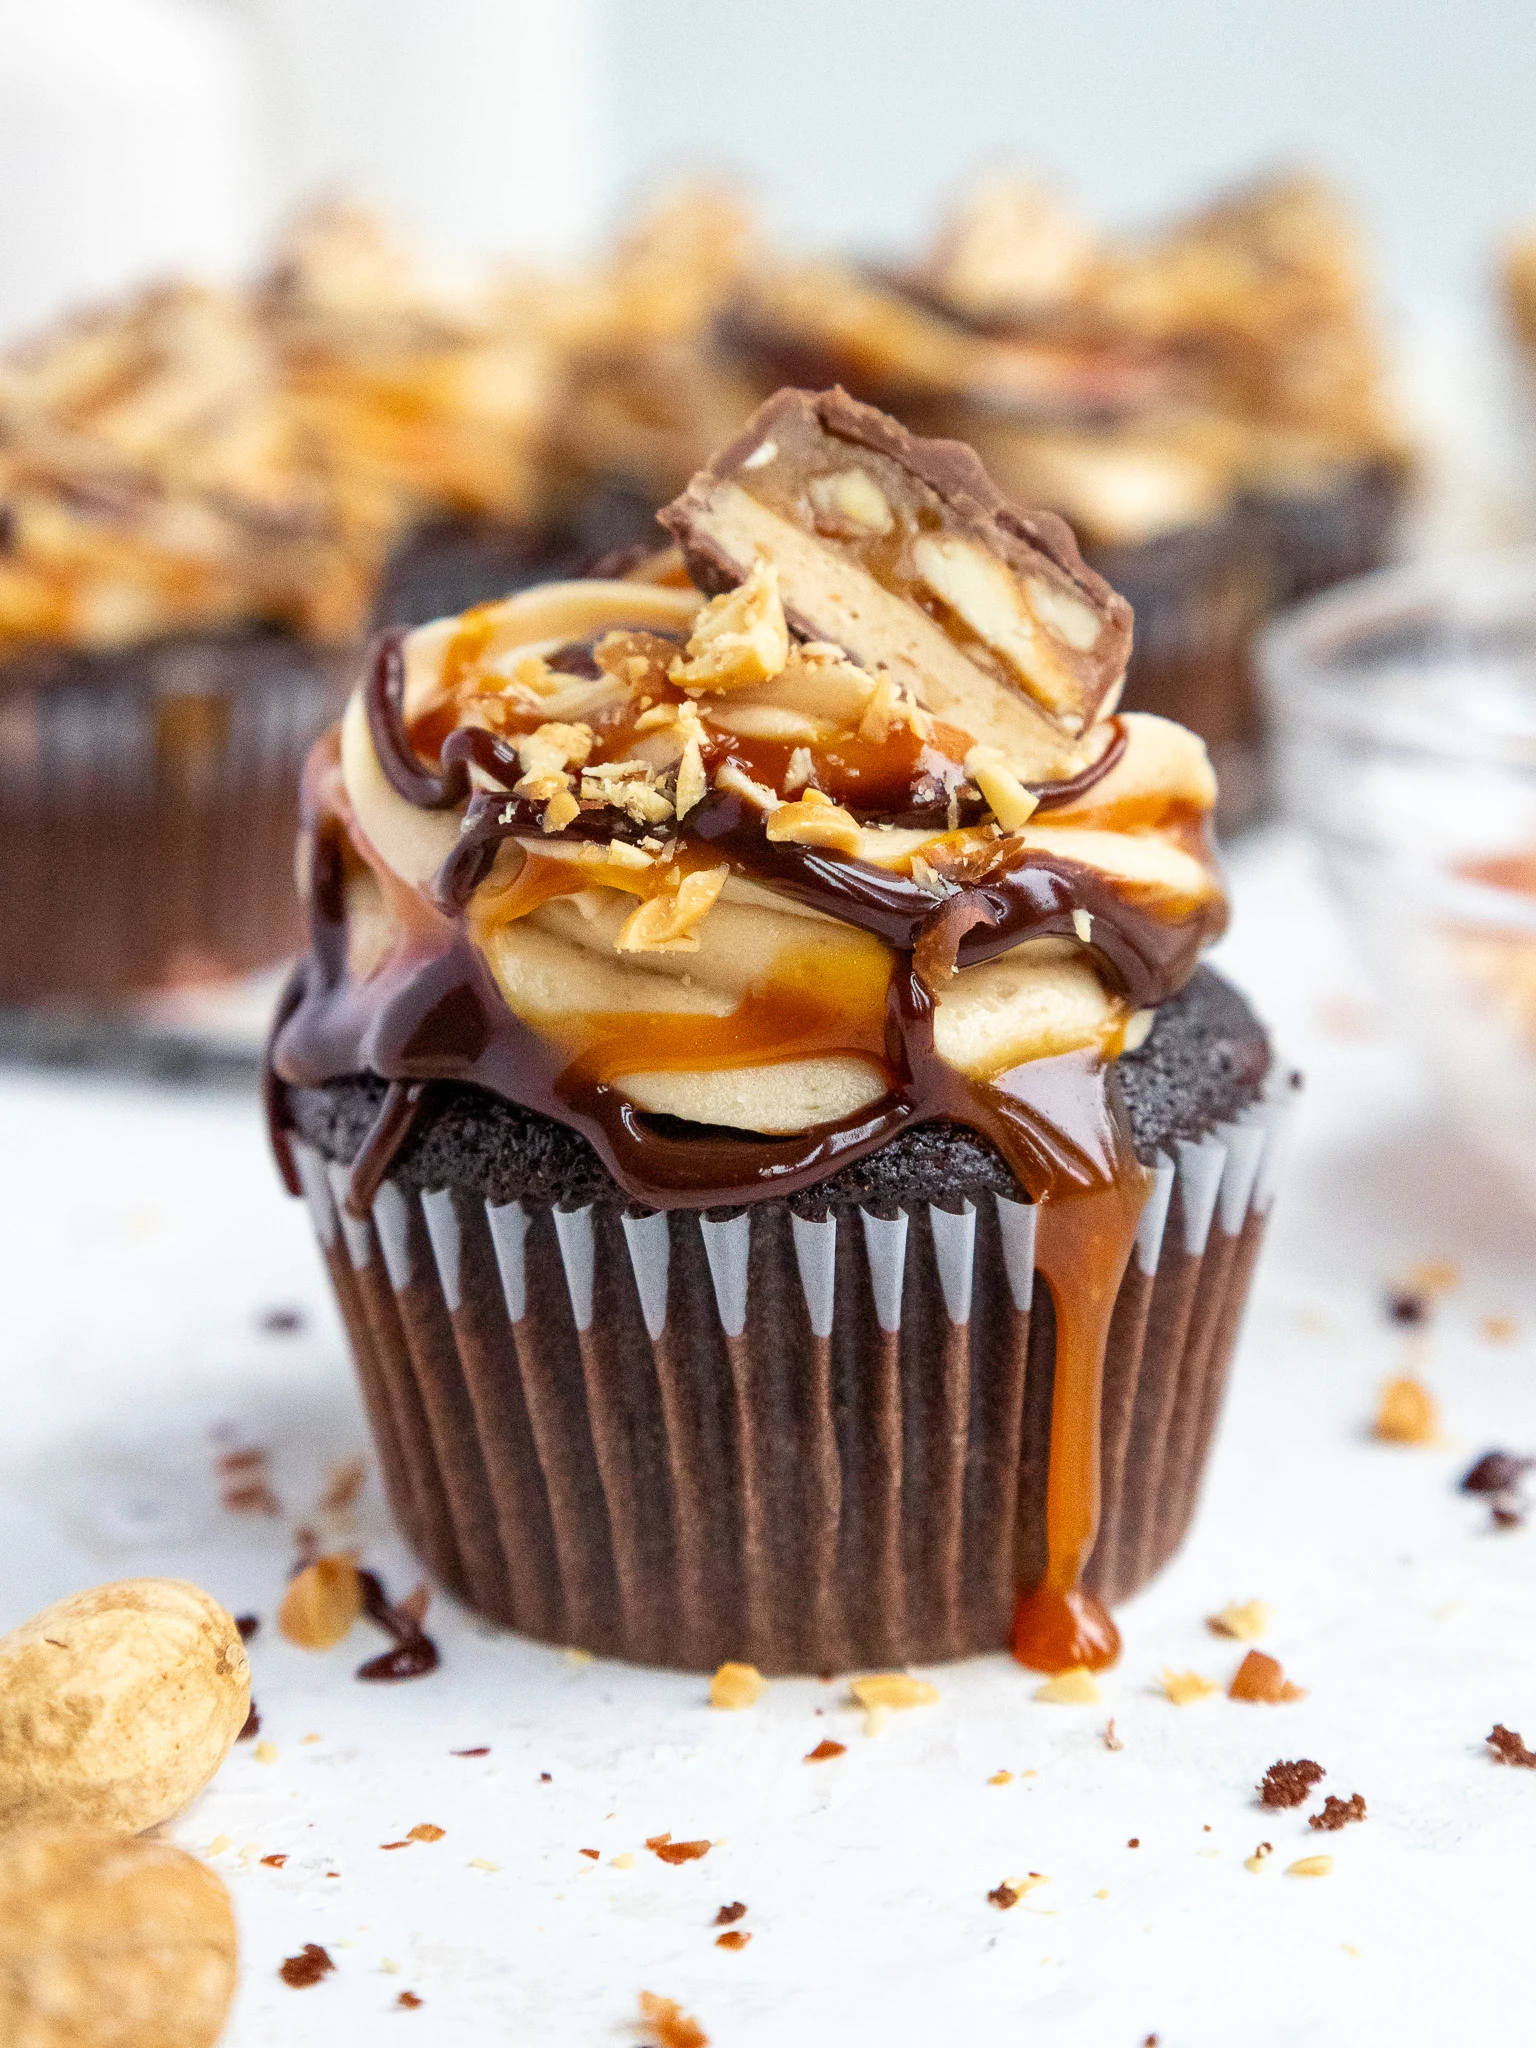 image of a snickers cupcake that's been decorated with peanut butter buttercream and caramel and chocolate ganache